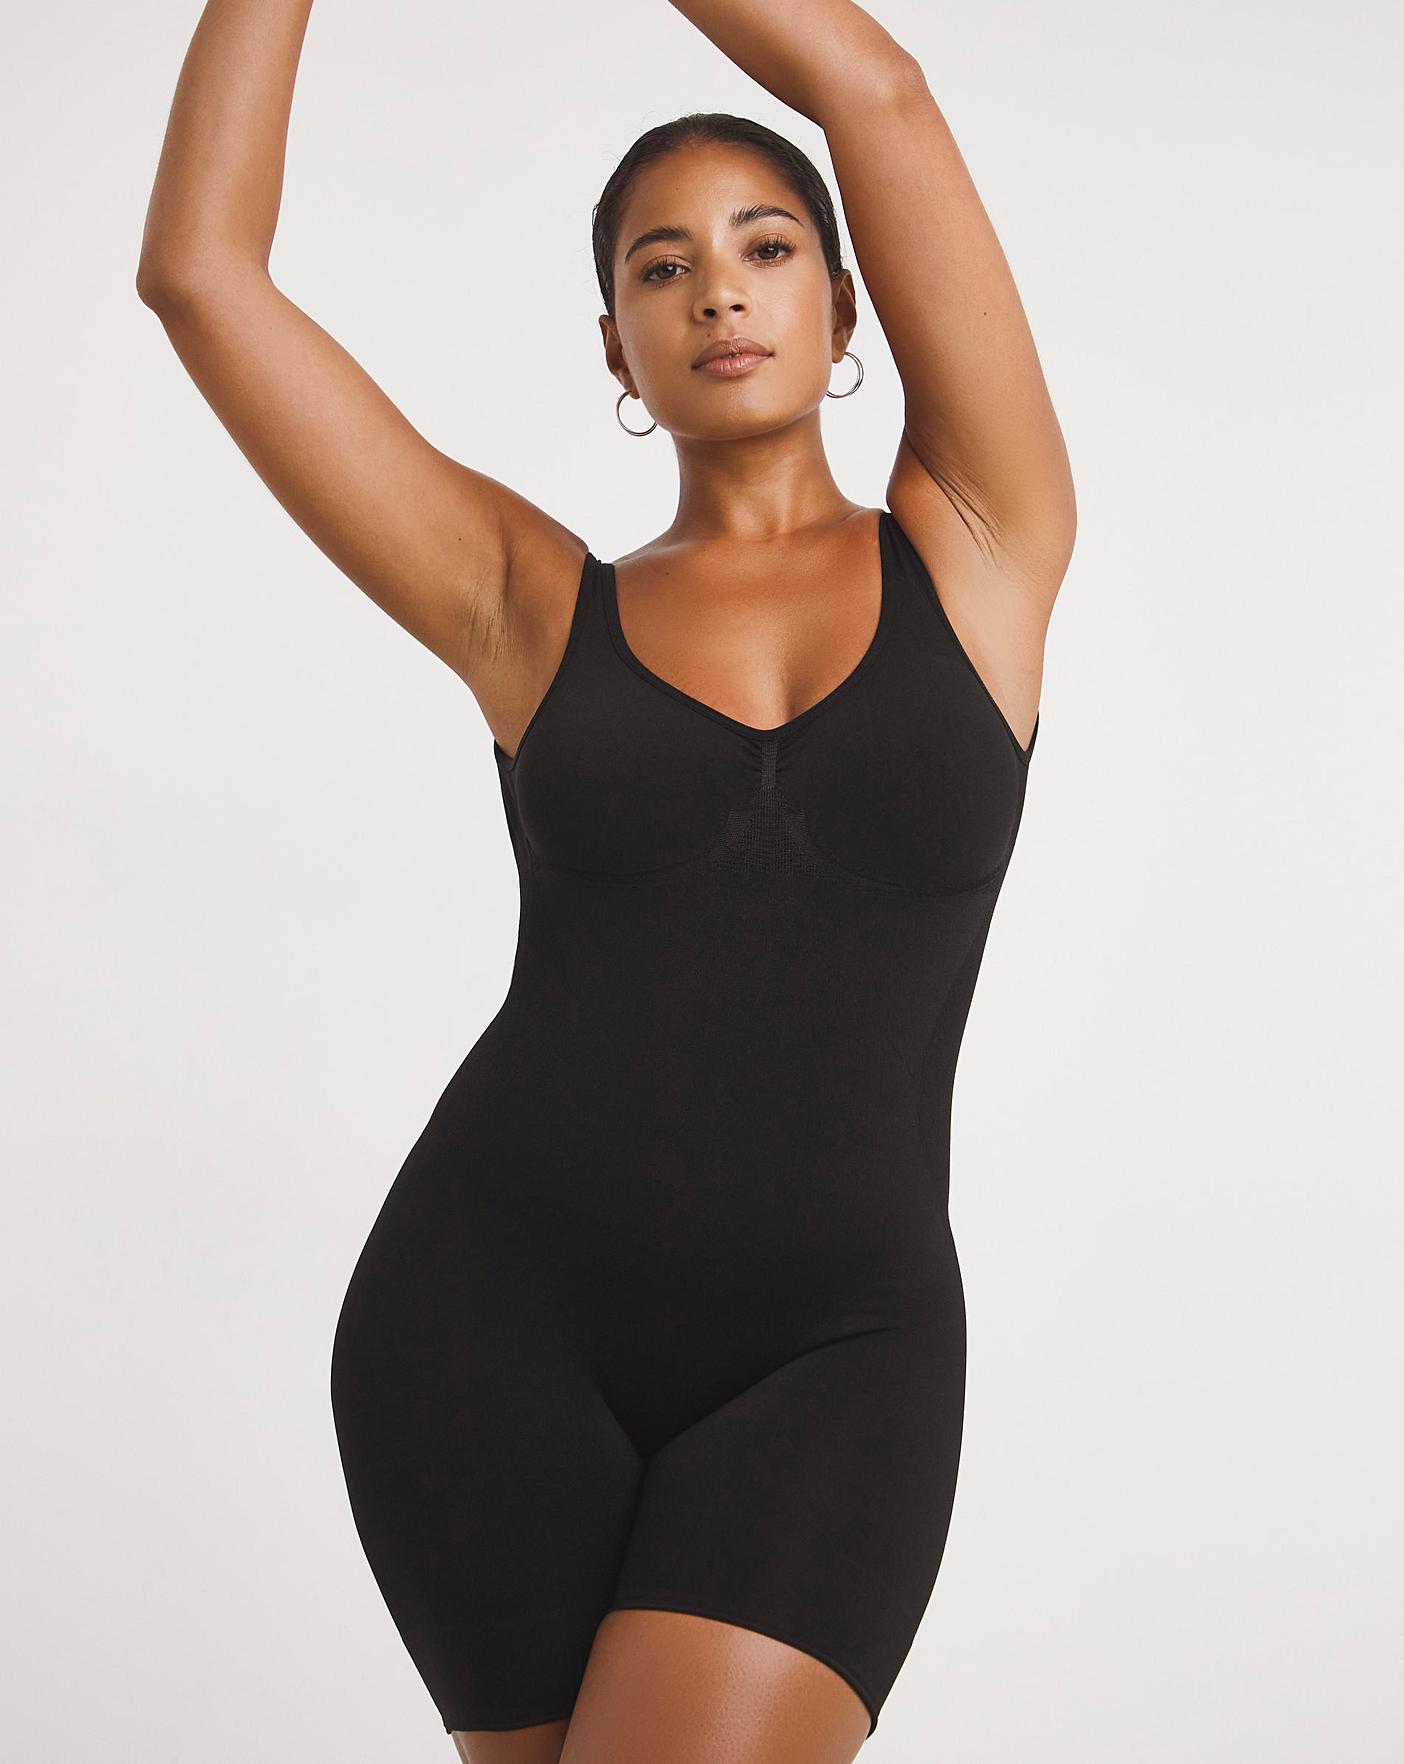 Shop Bodysuits & Corsets - Shaping Bodysuits for Full-Figured